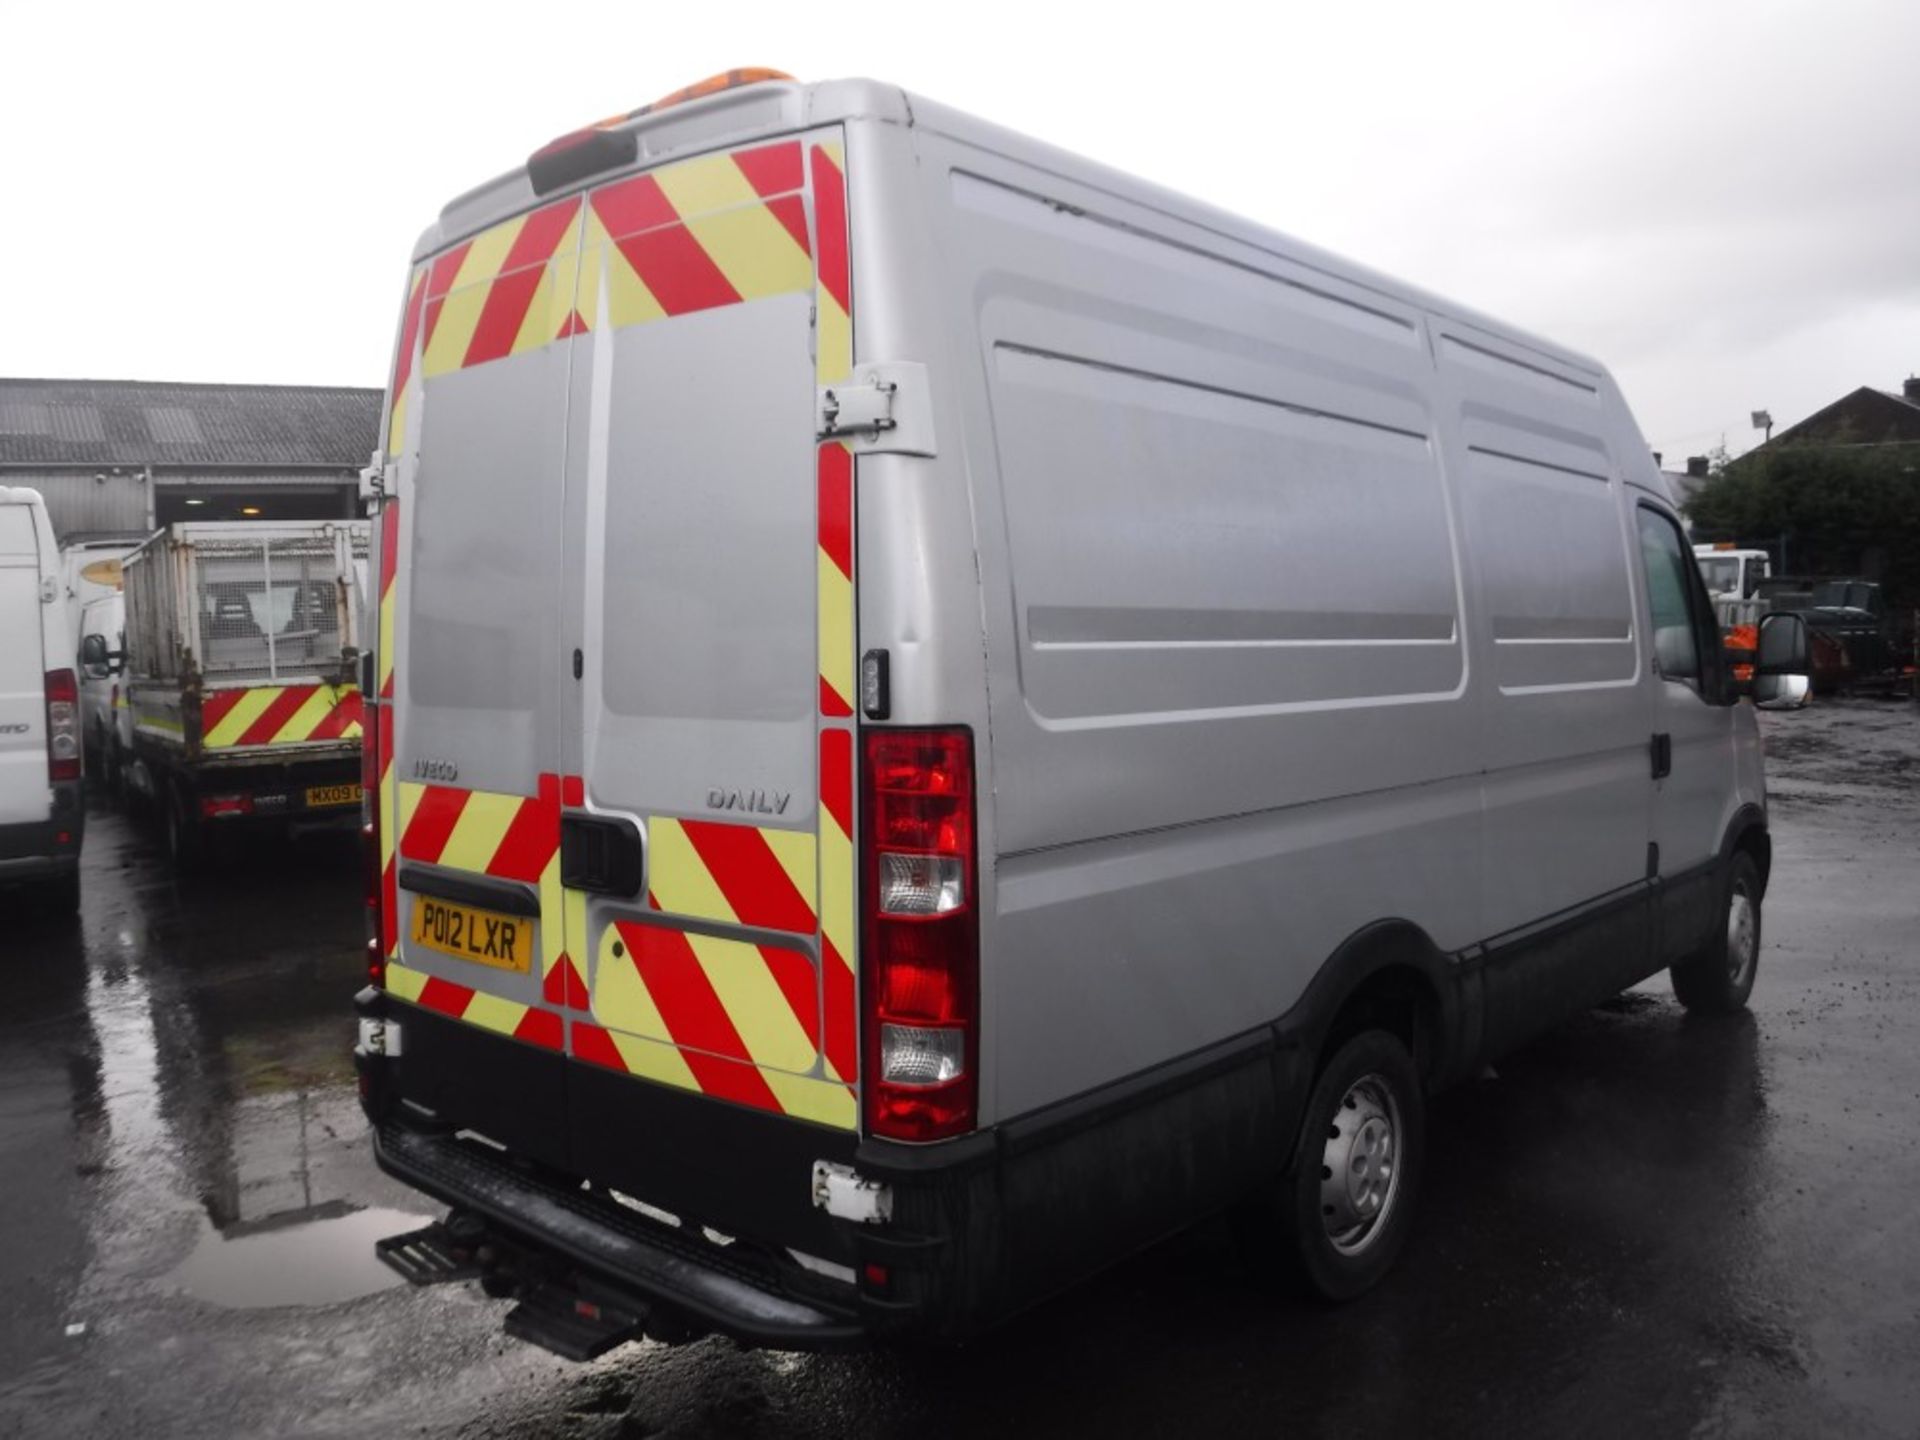 12 reg IVECO DAILY 35S13 MWB, 1ST REG 06/12, 126785M WARRANTED, V5 HERE, 1 OWNER FROM NEW [+ VAT] - Image 4 of 5